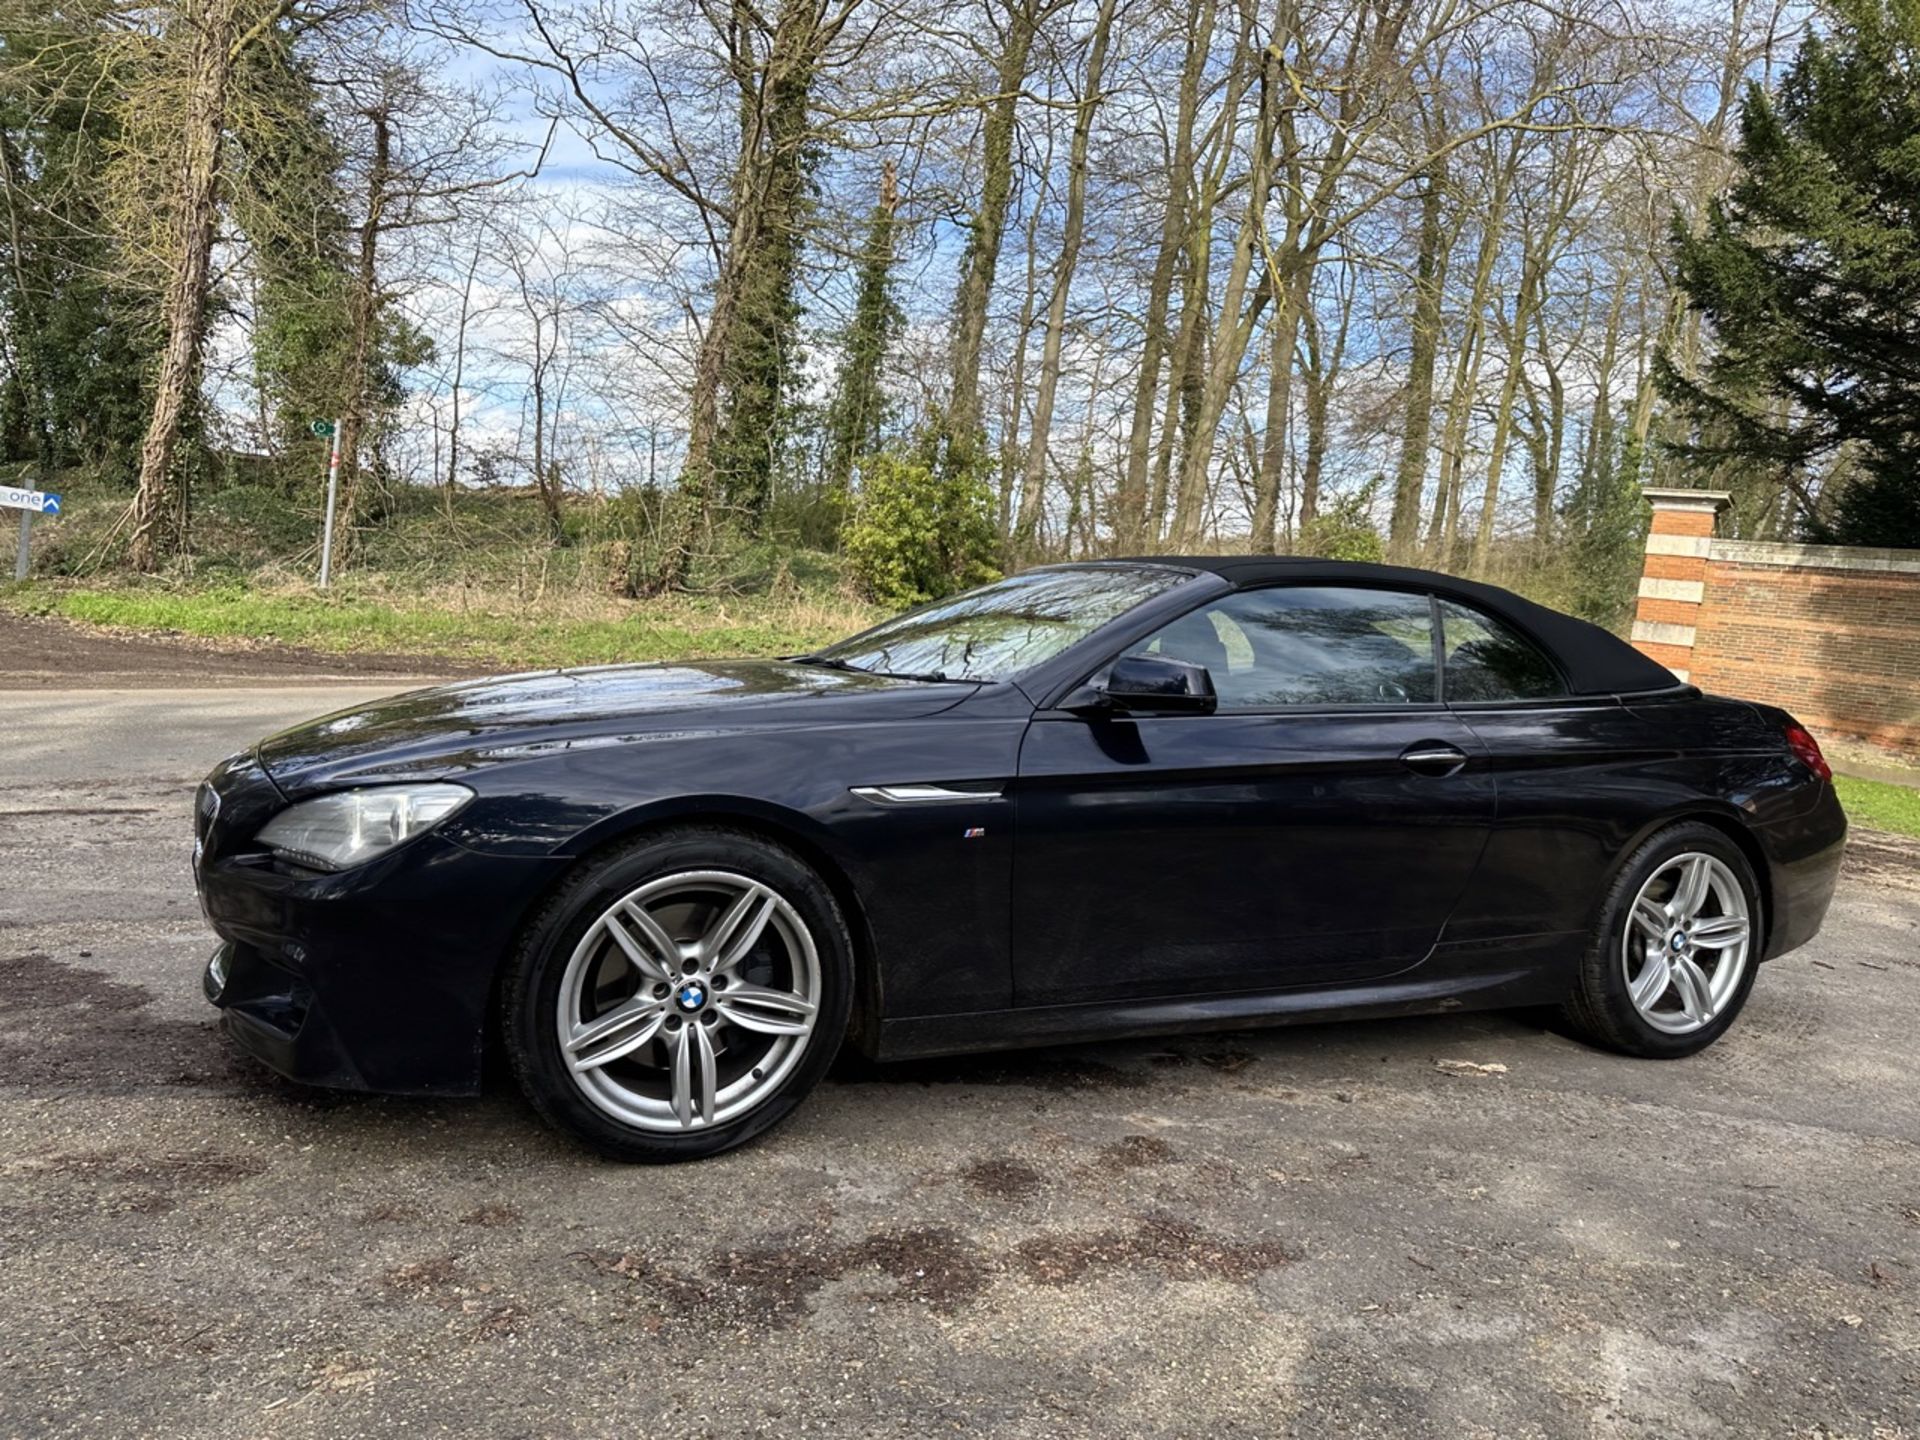 BMW 6 SERIES 640d (M SPORT) Ultimate Summer Car - AUTOMATIC - Convertible - 2014 - 3L Diesel - Image 6 of 18